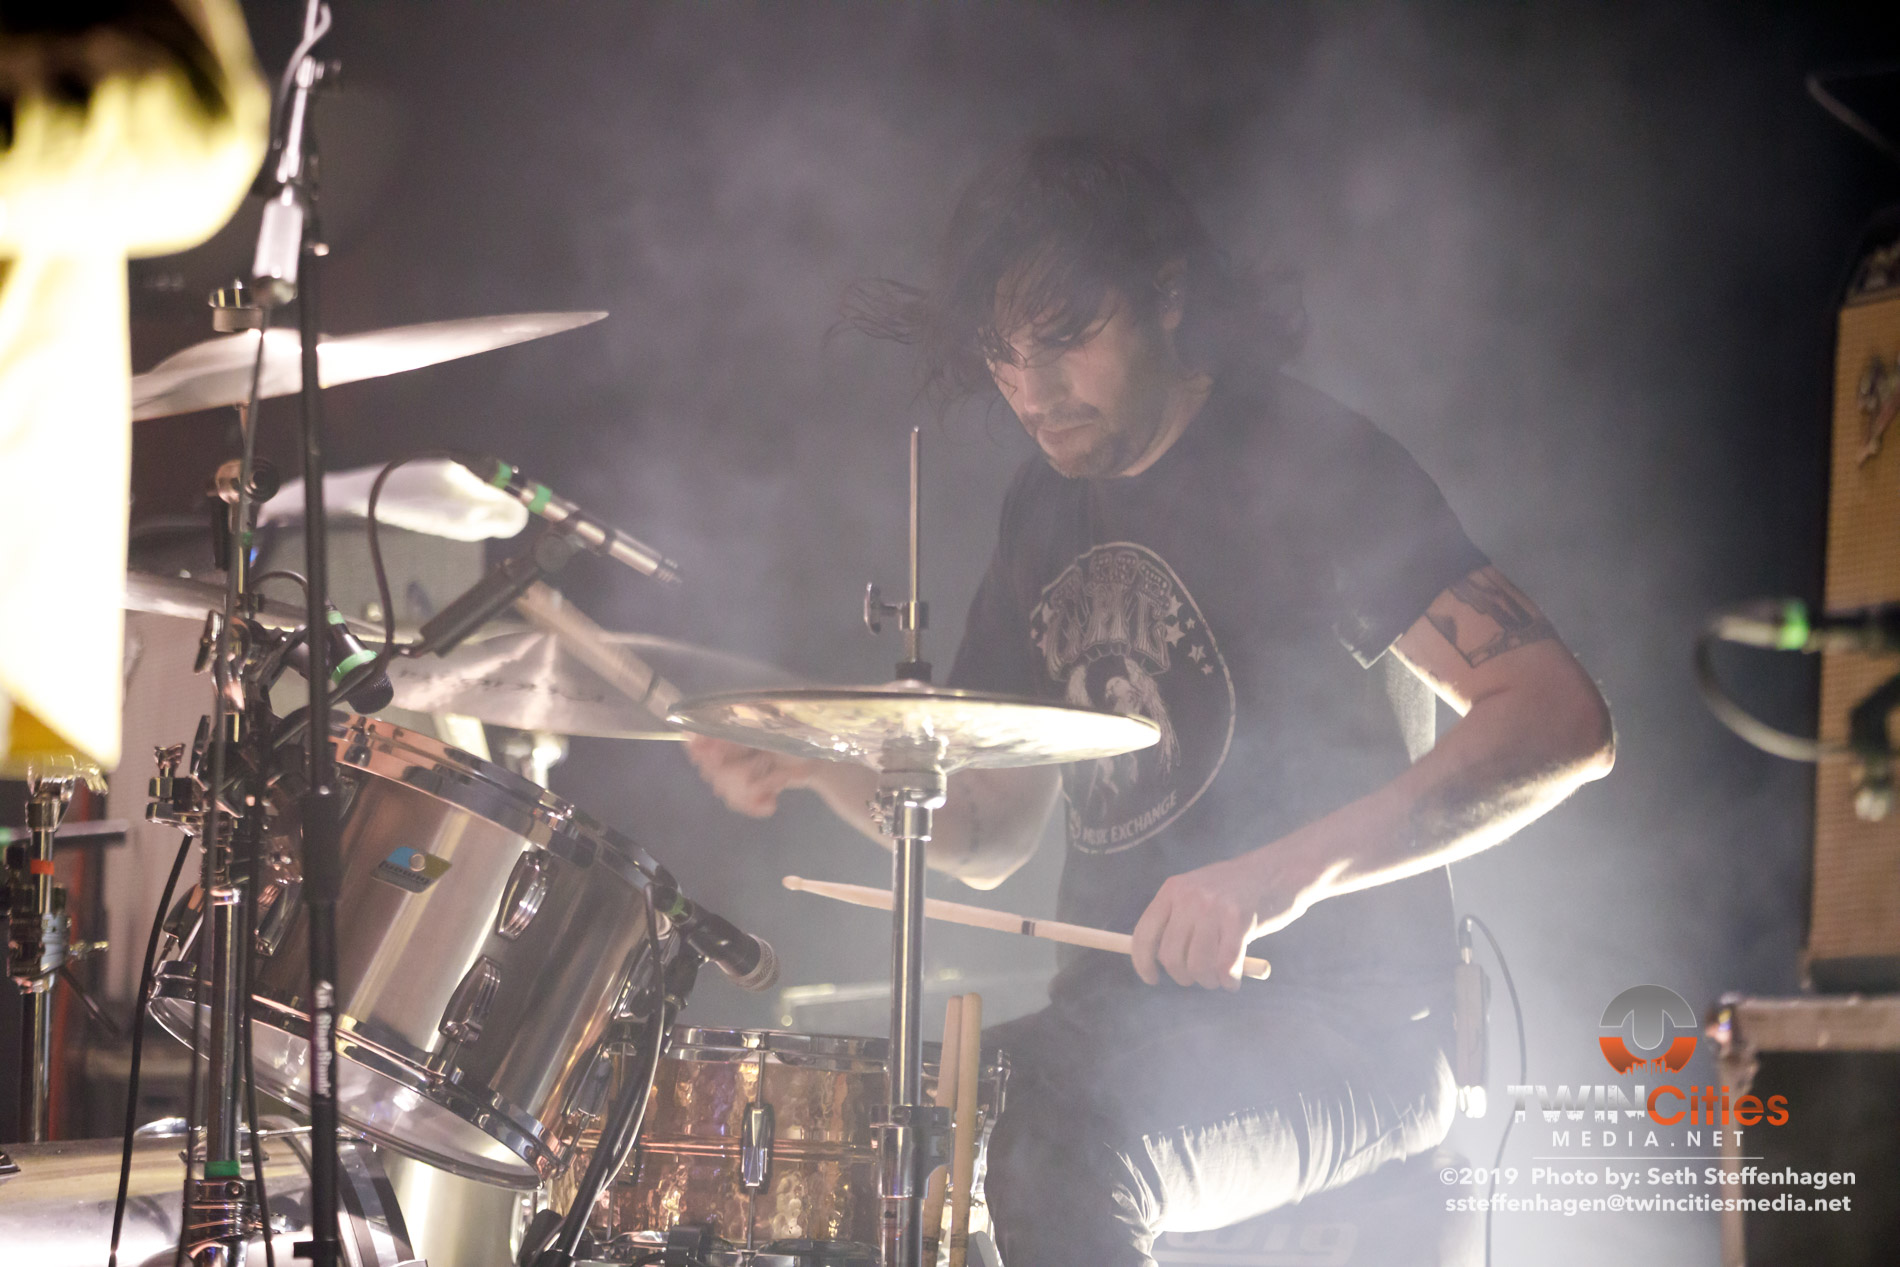 September 12, 2019 - Minneapolis, Minnesota, United States - Russian Circles live in concert at The Cedar Cultural Center along with FACS as the openers.

(Photo by Seth Steffenhagen/Steffenhagen Photography)